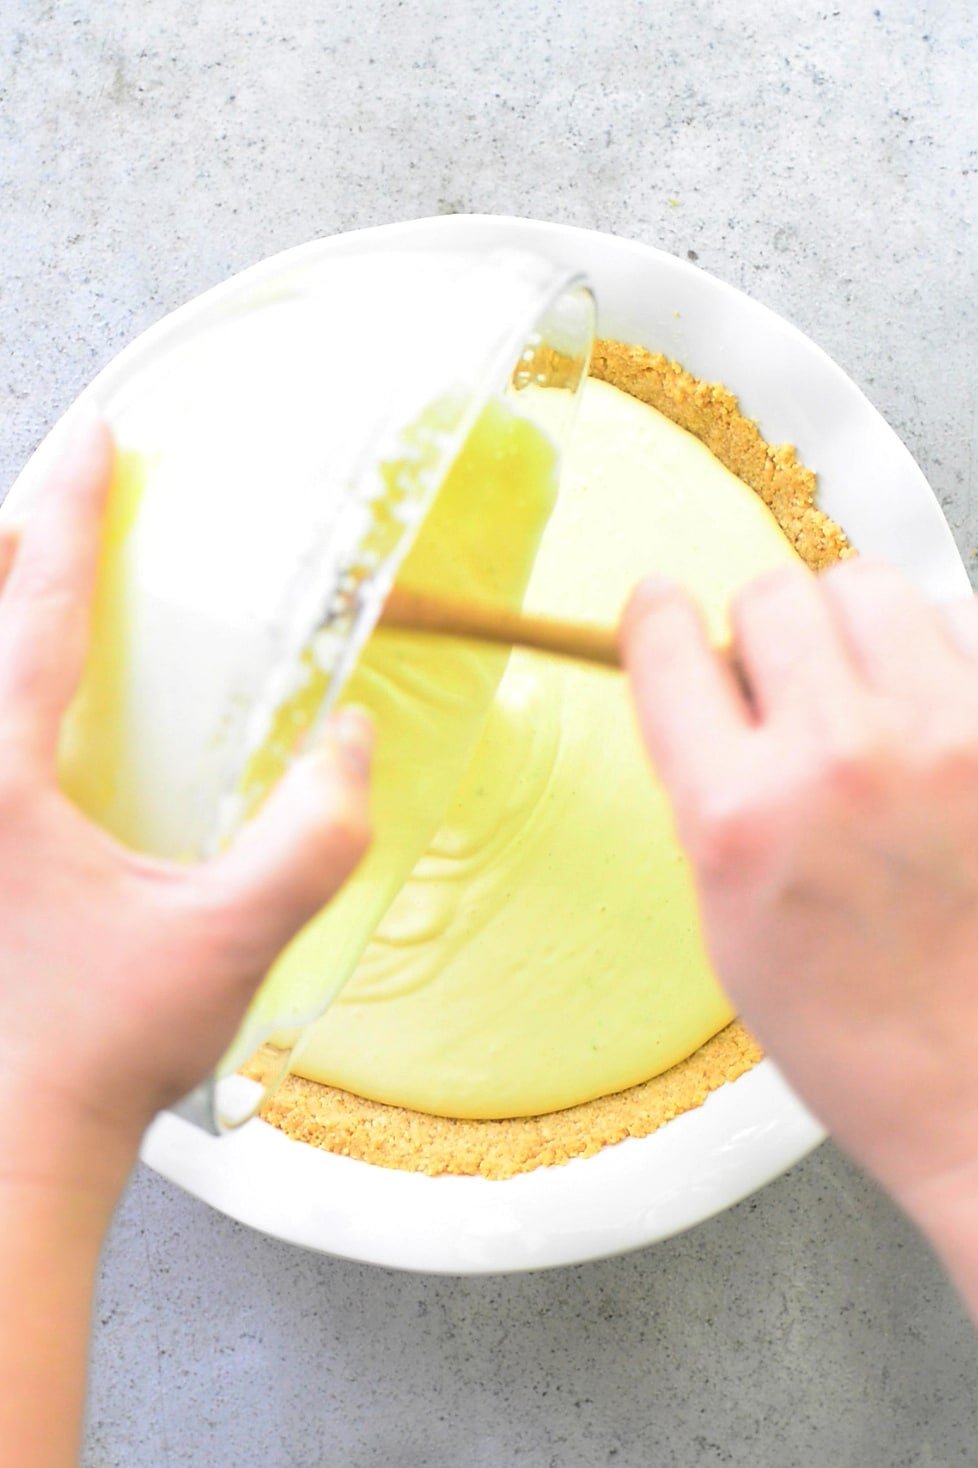 Pour the filling into a crust.